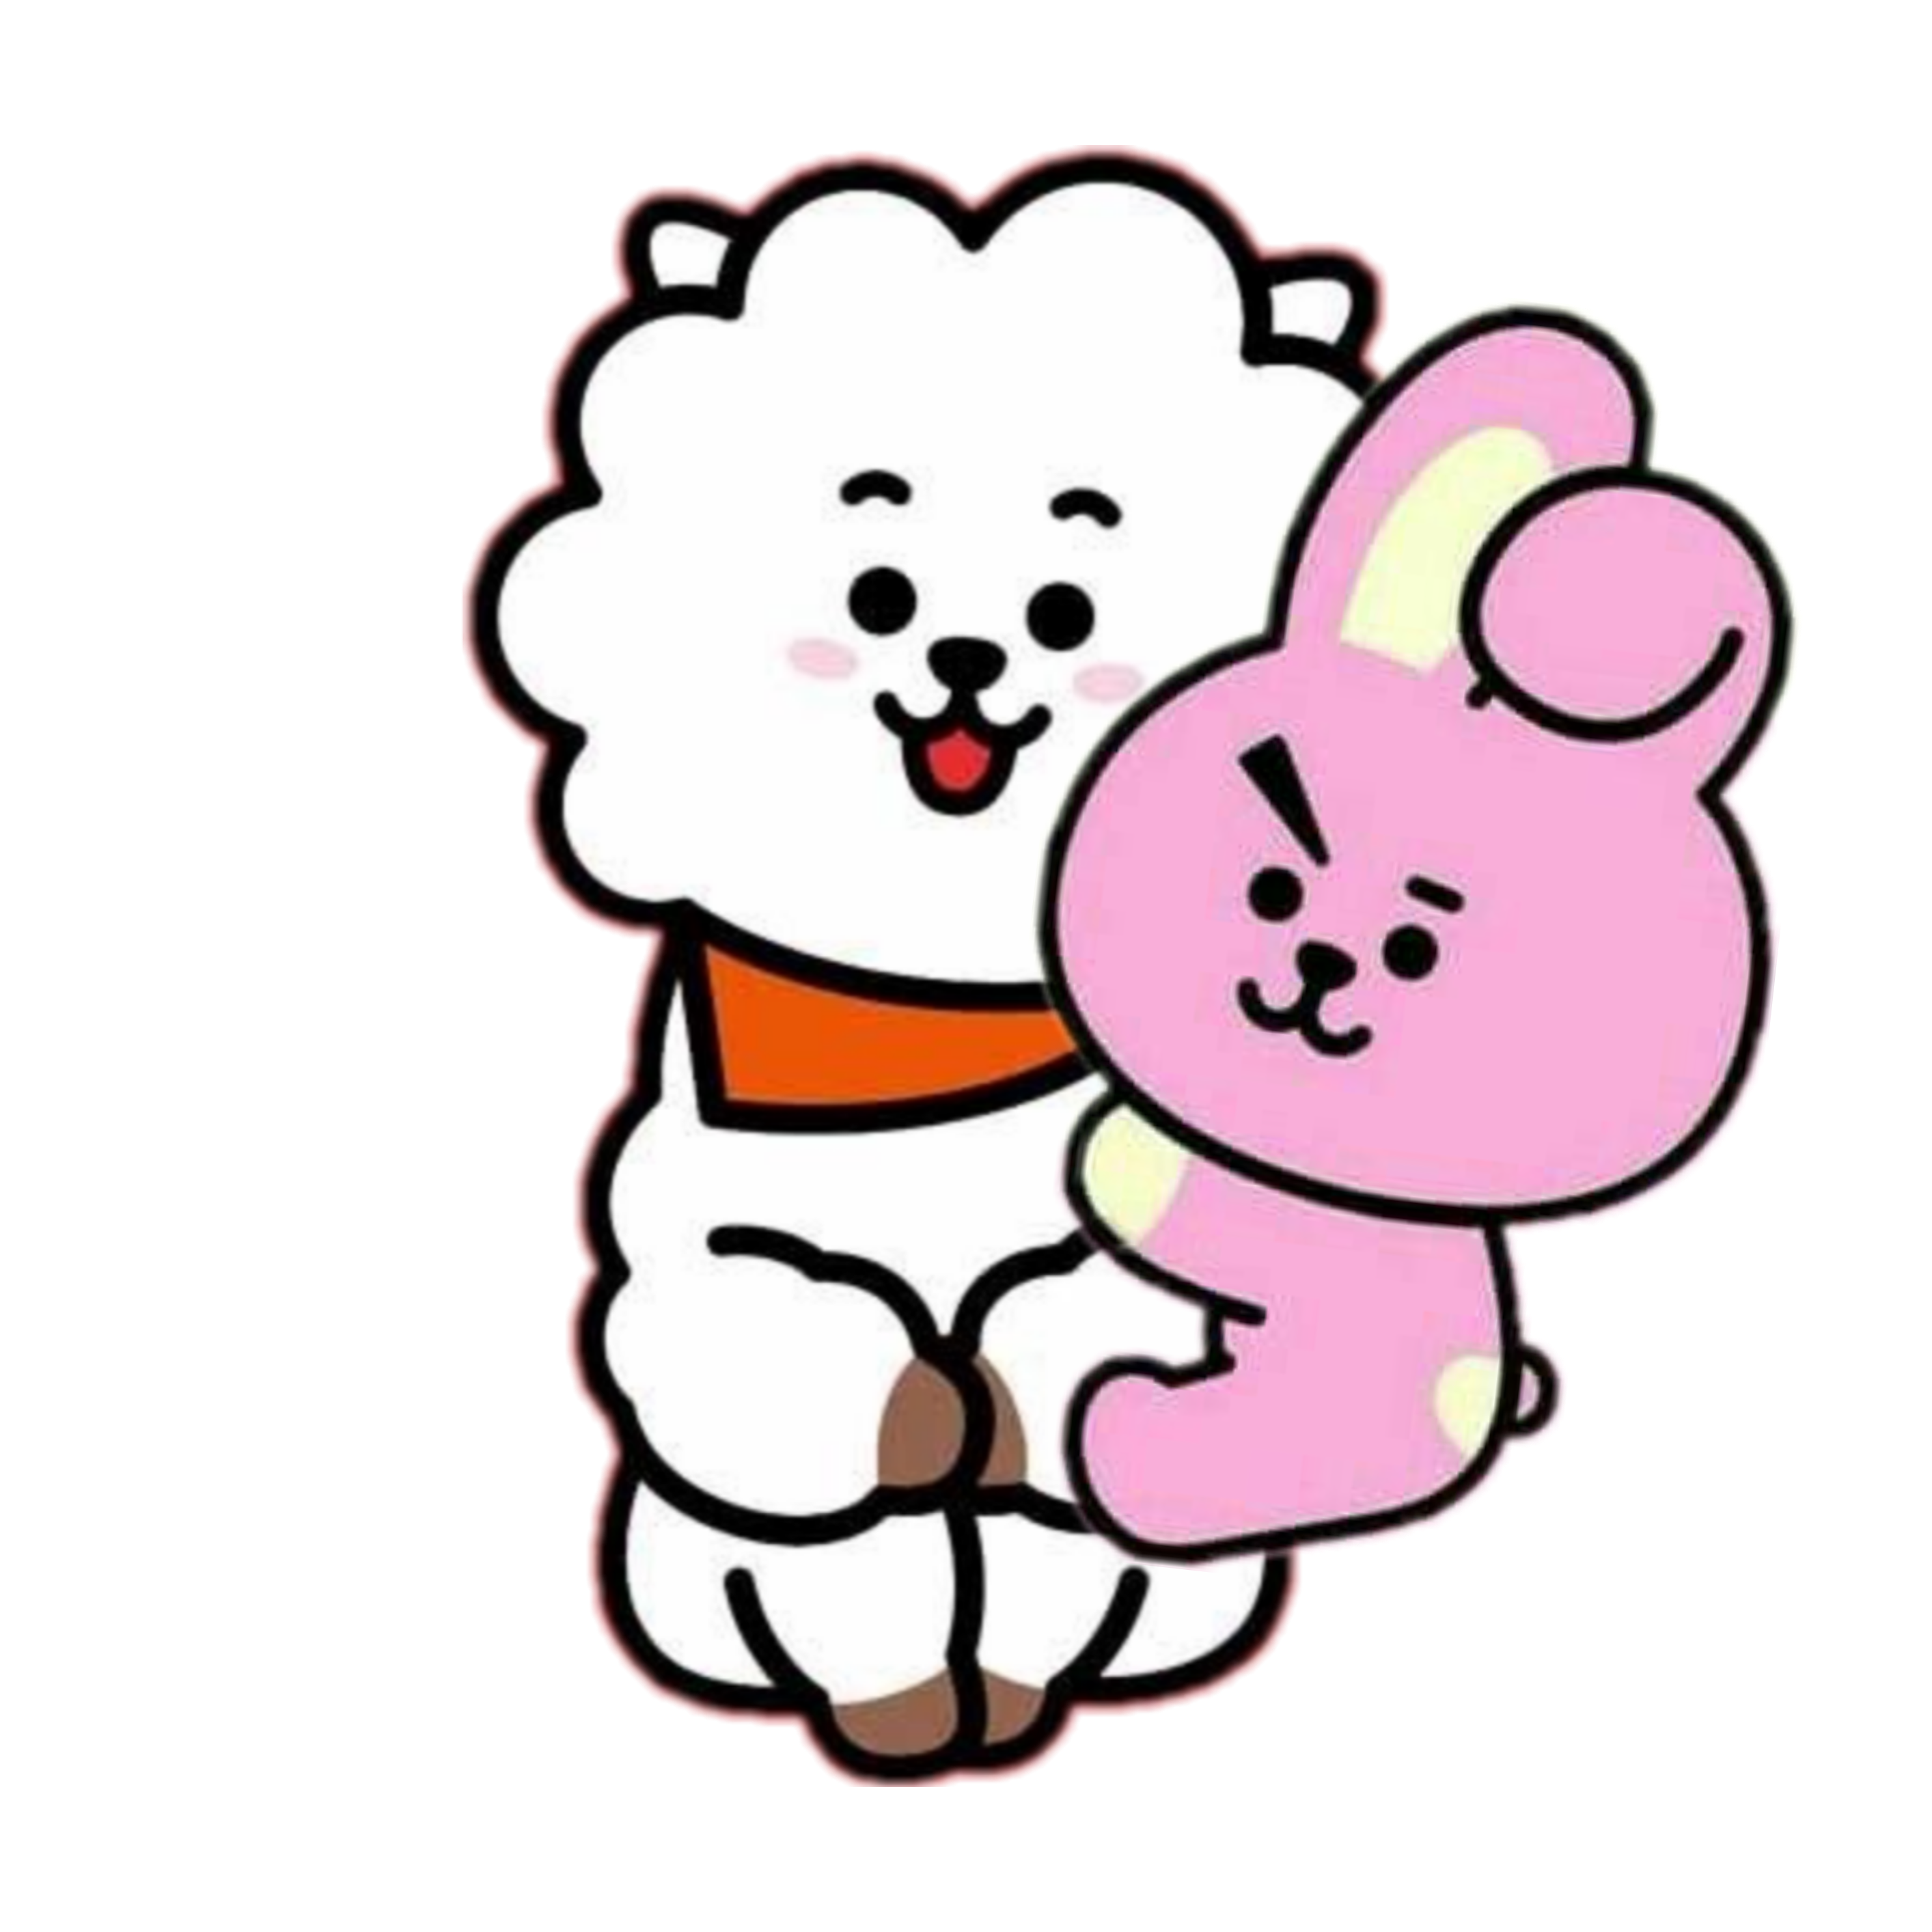 This visual is about bt21 cooky rj cookyrj jinkook freetoedit #bt21 #cooky ...